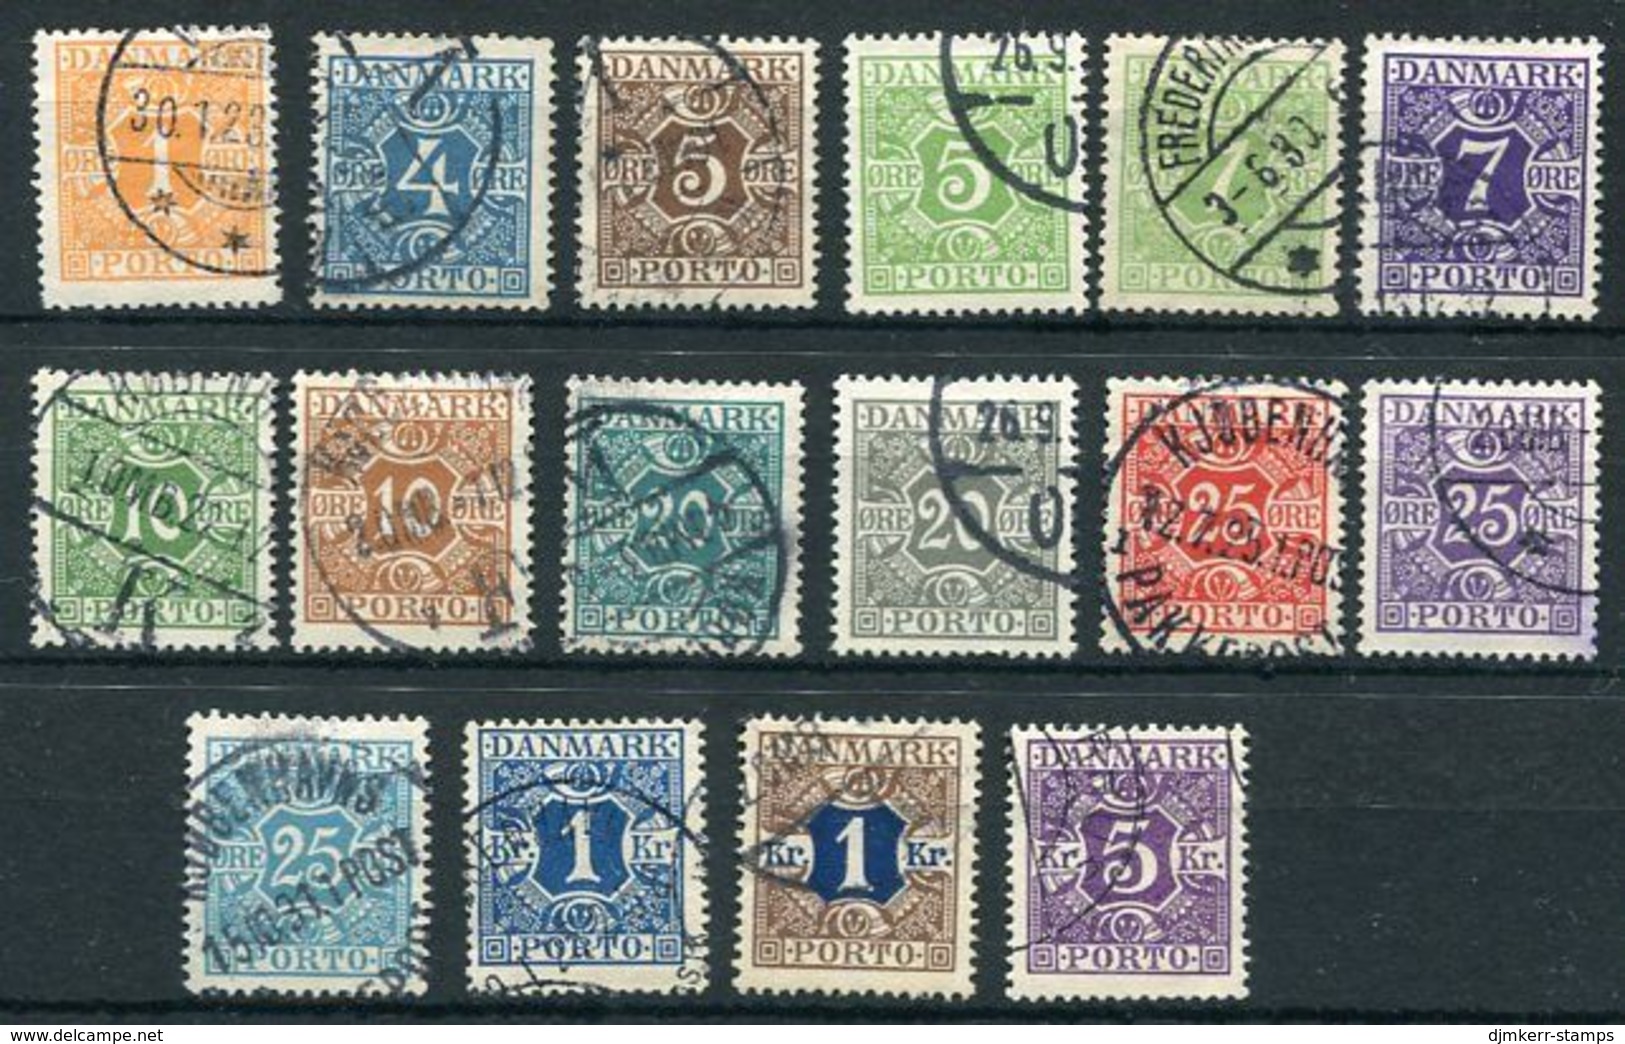 DENMARK 1921-30 Postage Due Set With Crown Watermark, Used.  Michel Porto 9-24 - Postage Due